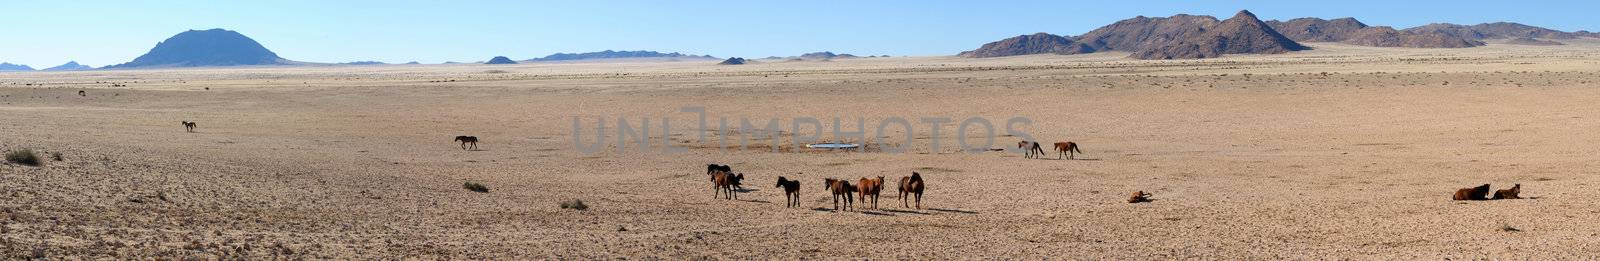 A panorama of the Wild Horses of the Namib made from five separate photos taken near Aus, Namibia.